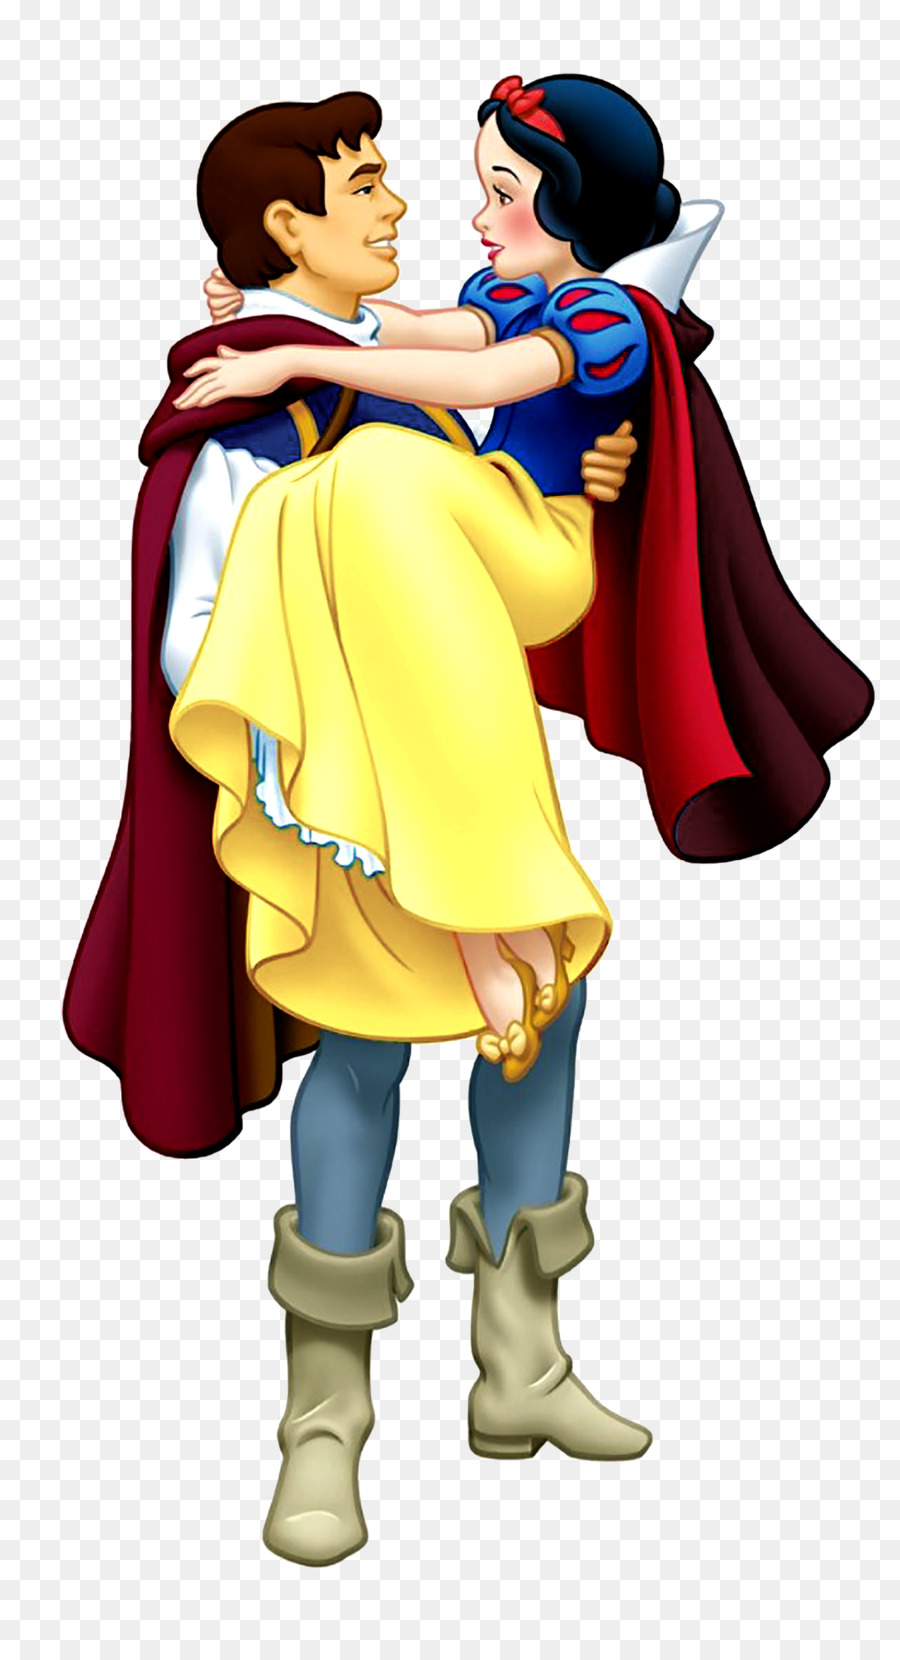 Prince Charming Snow White and the Seven Dwarfs Queen - Snow White png download - 1329*2423 - Free Transparent Prince png Download.